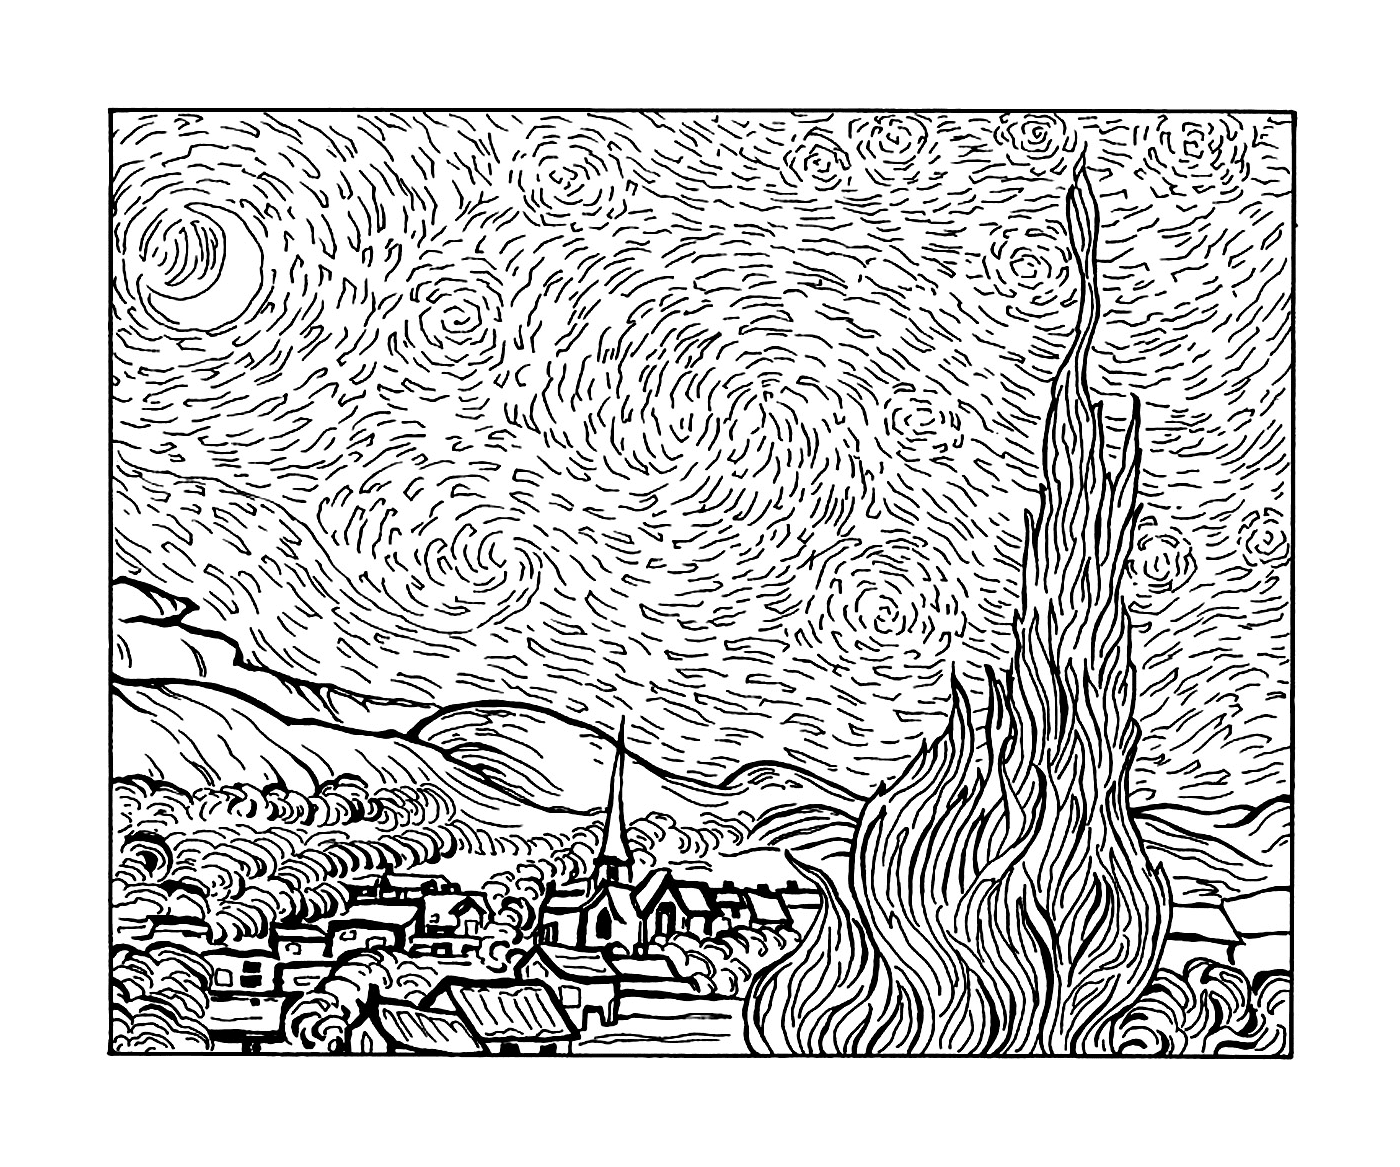  a city and a tree according to Van Gogh's Starry Night 